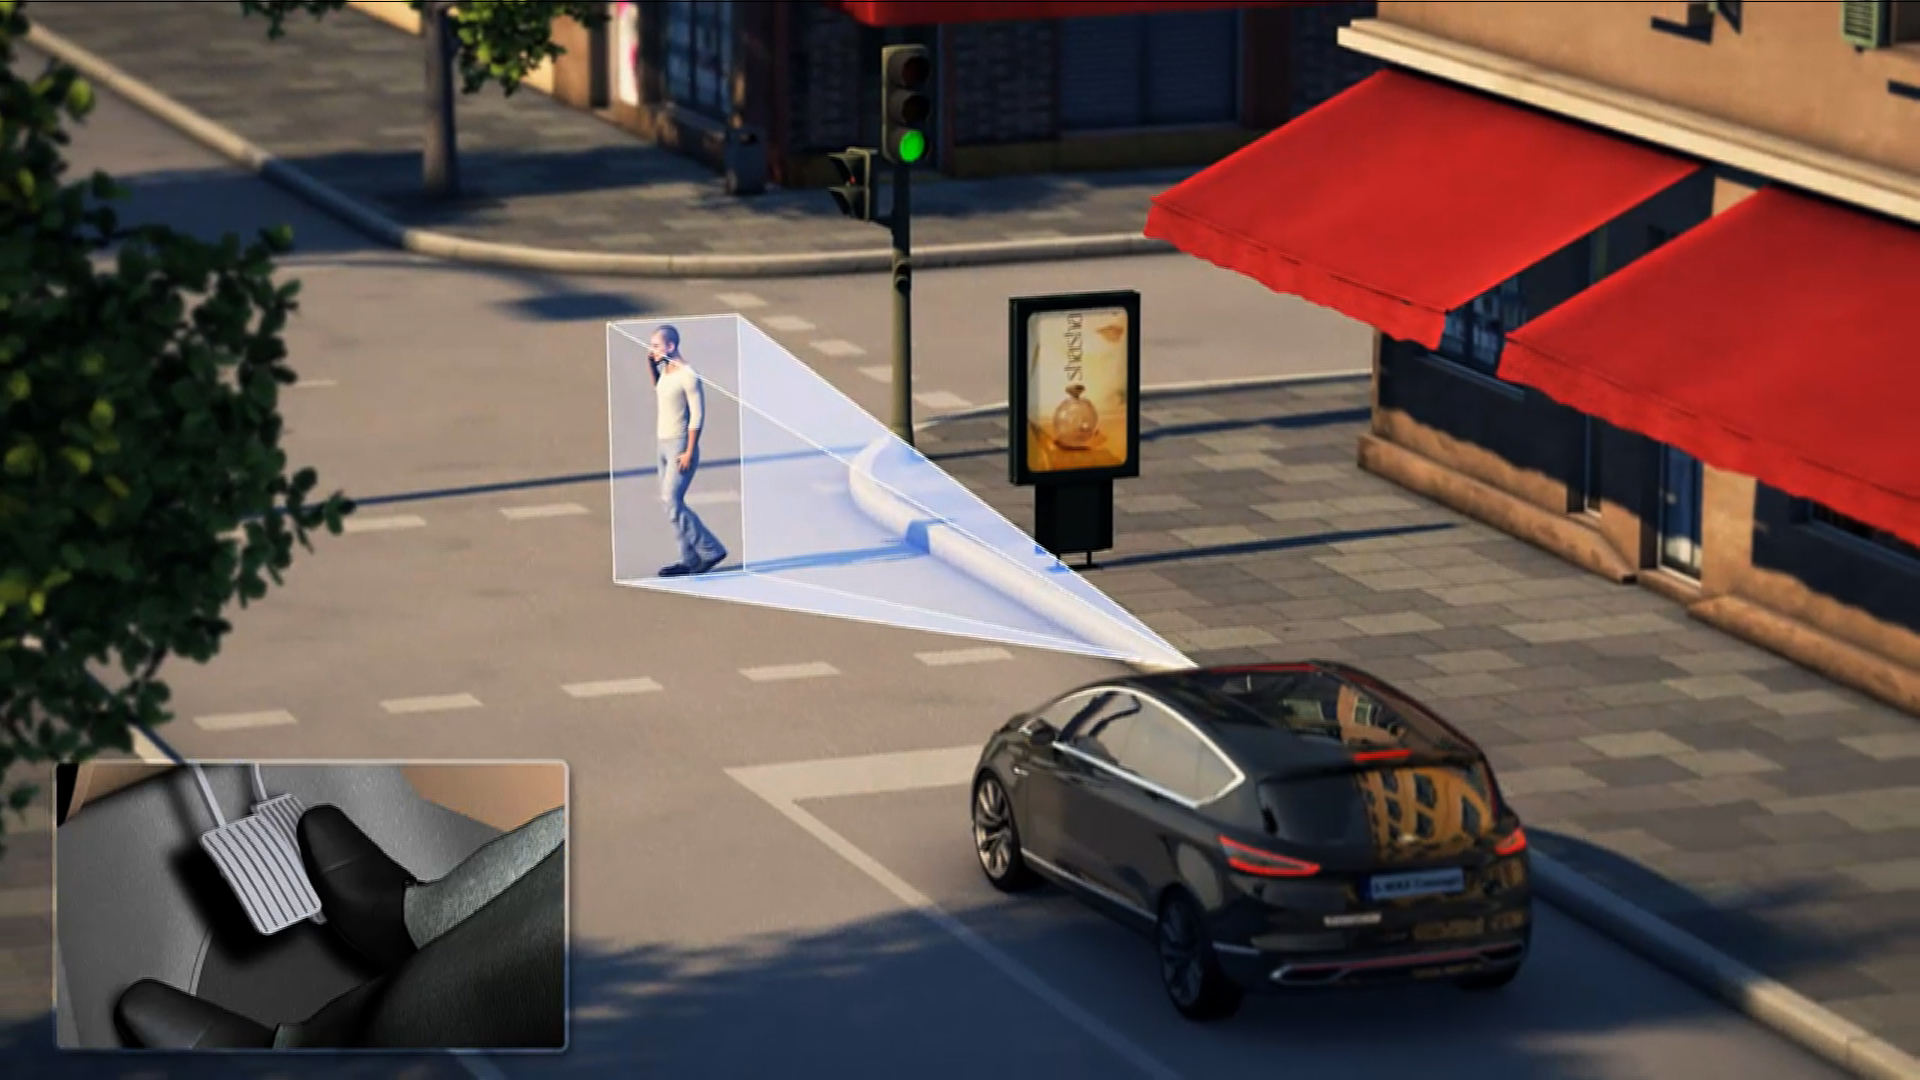 Technology being tested by Ford could help keep you from running over clueless pedestrians talking on cellphones.